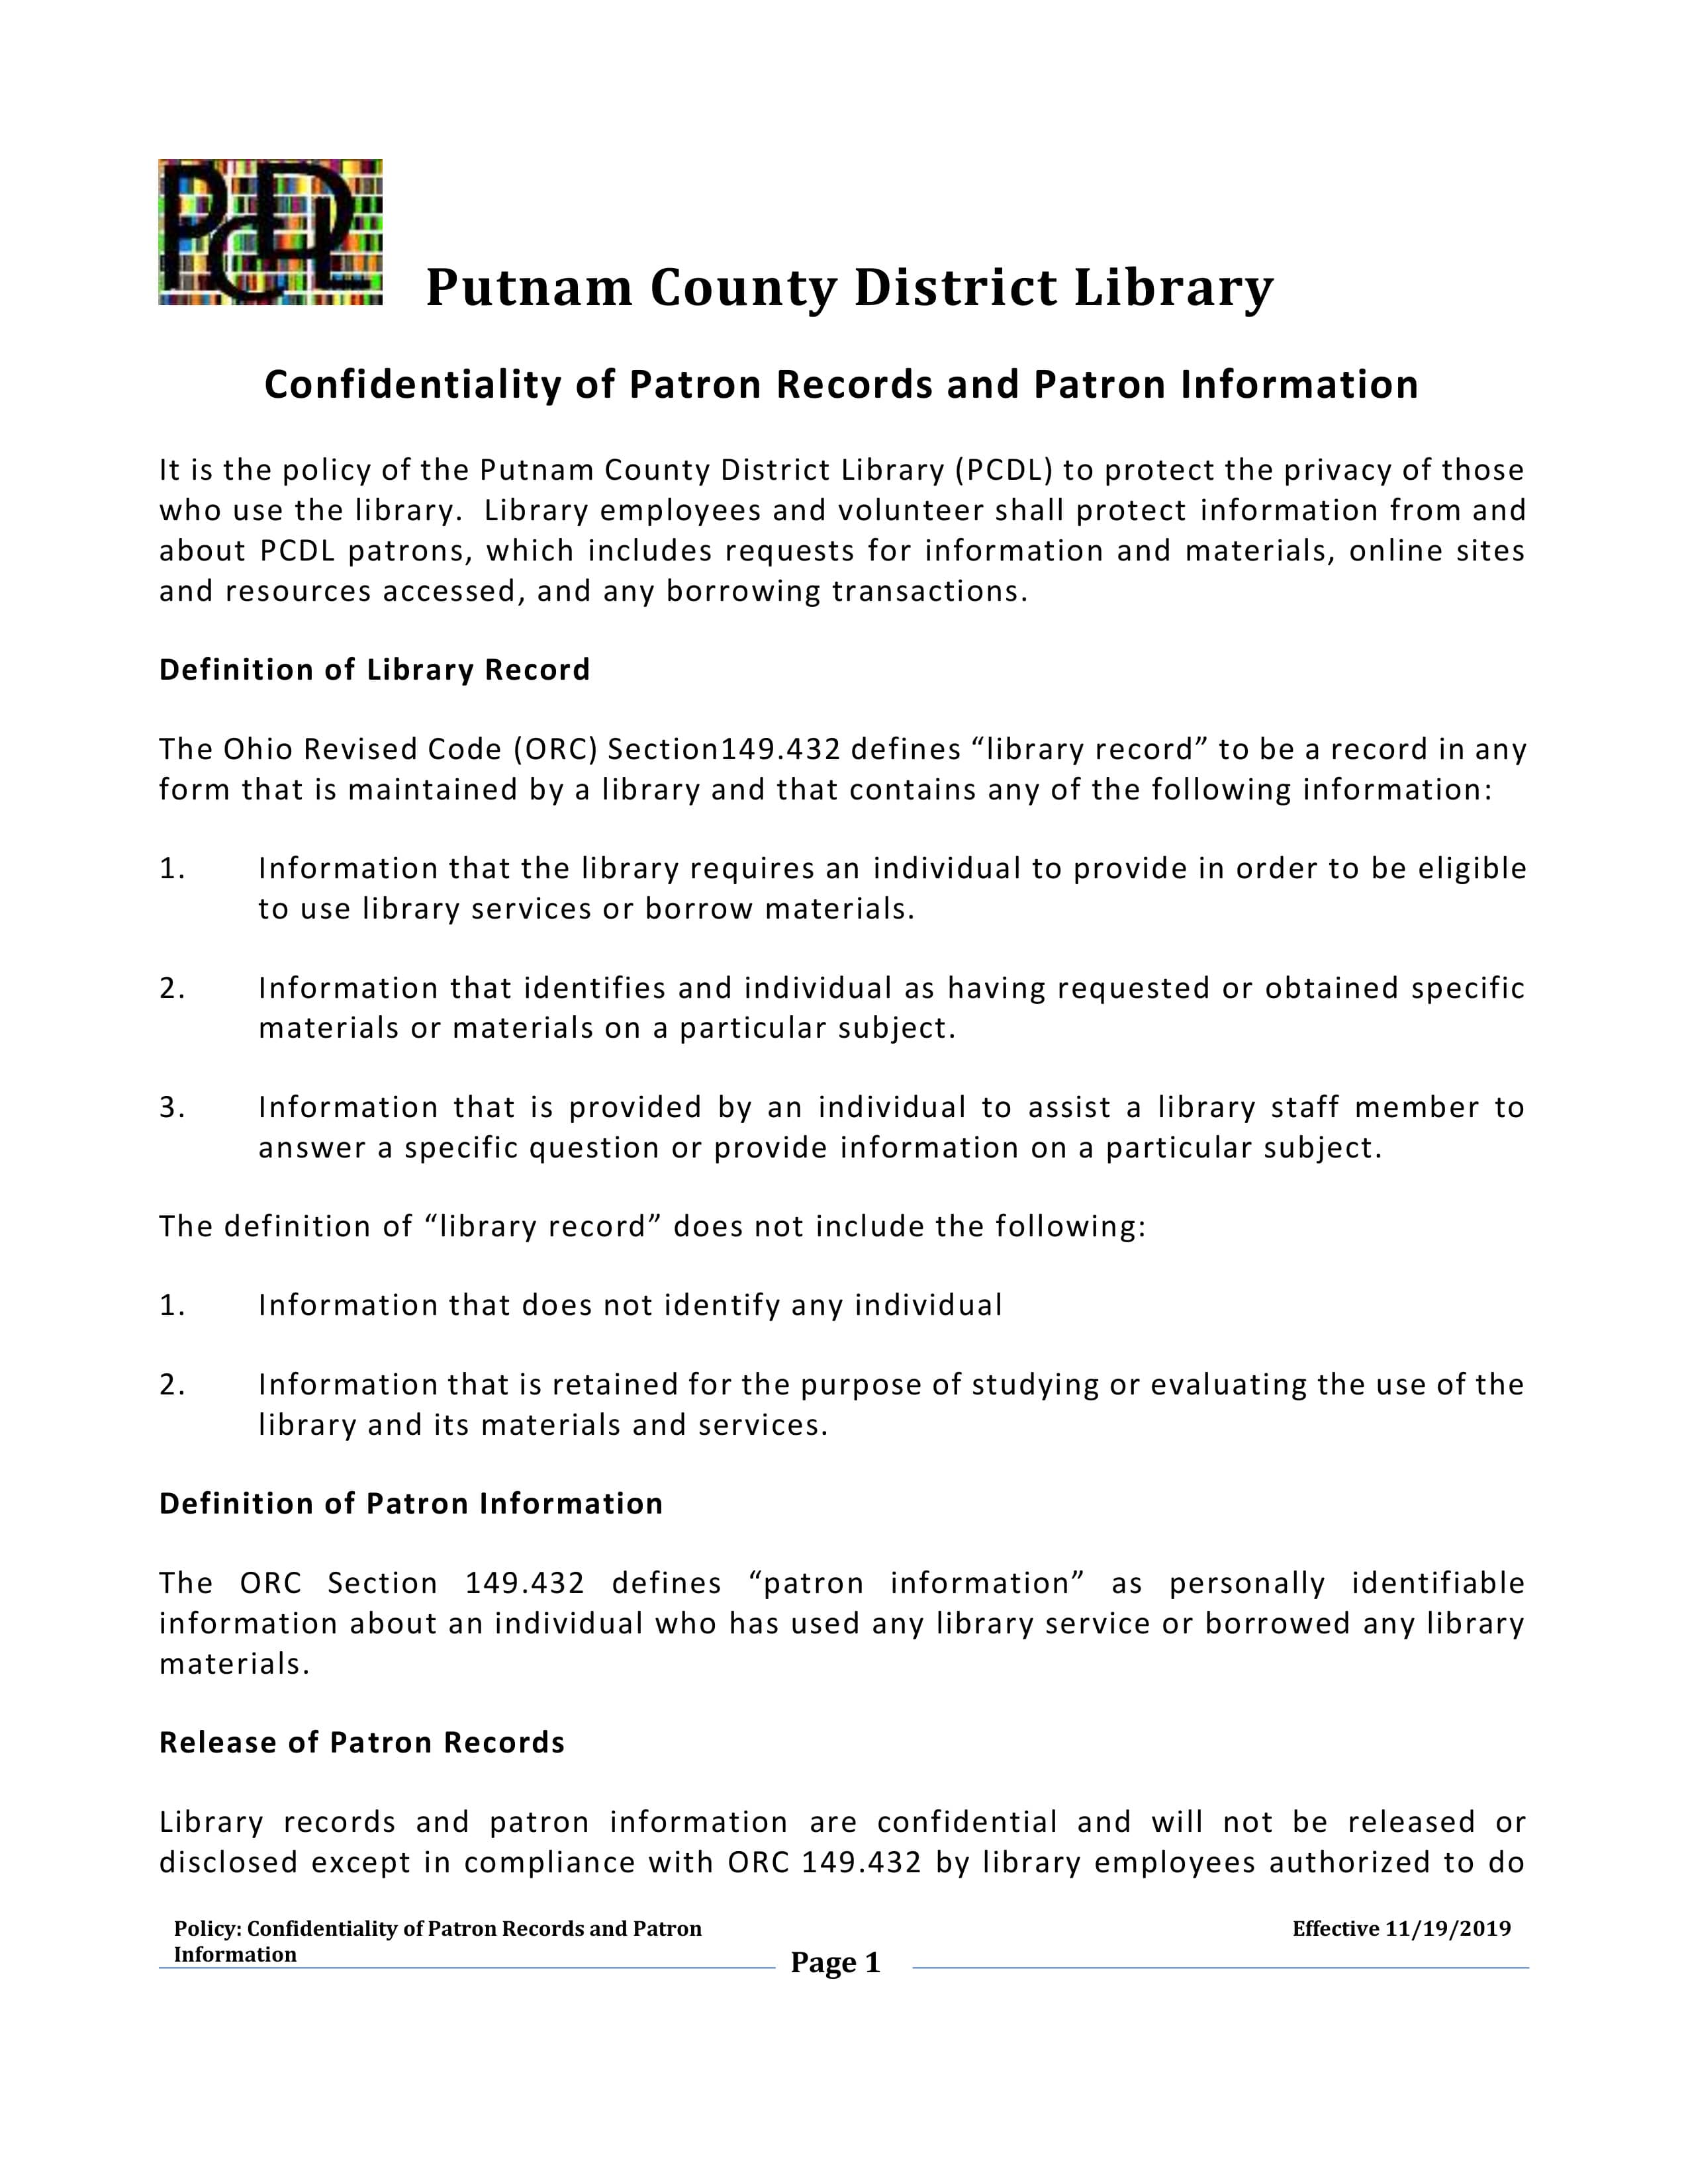 Confidentiality of Patron Records and Patron Information page 1 call 419-523-3747 ext 3 for more information